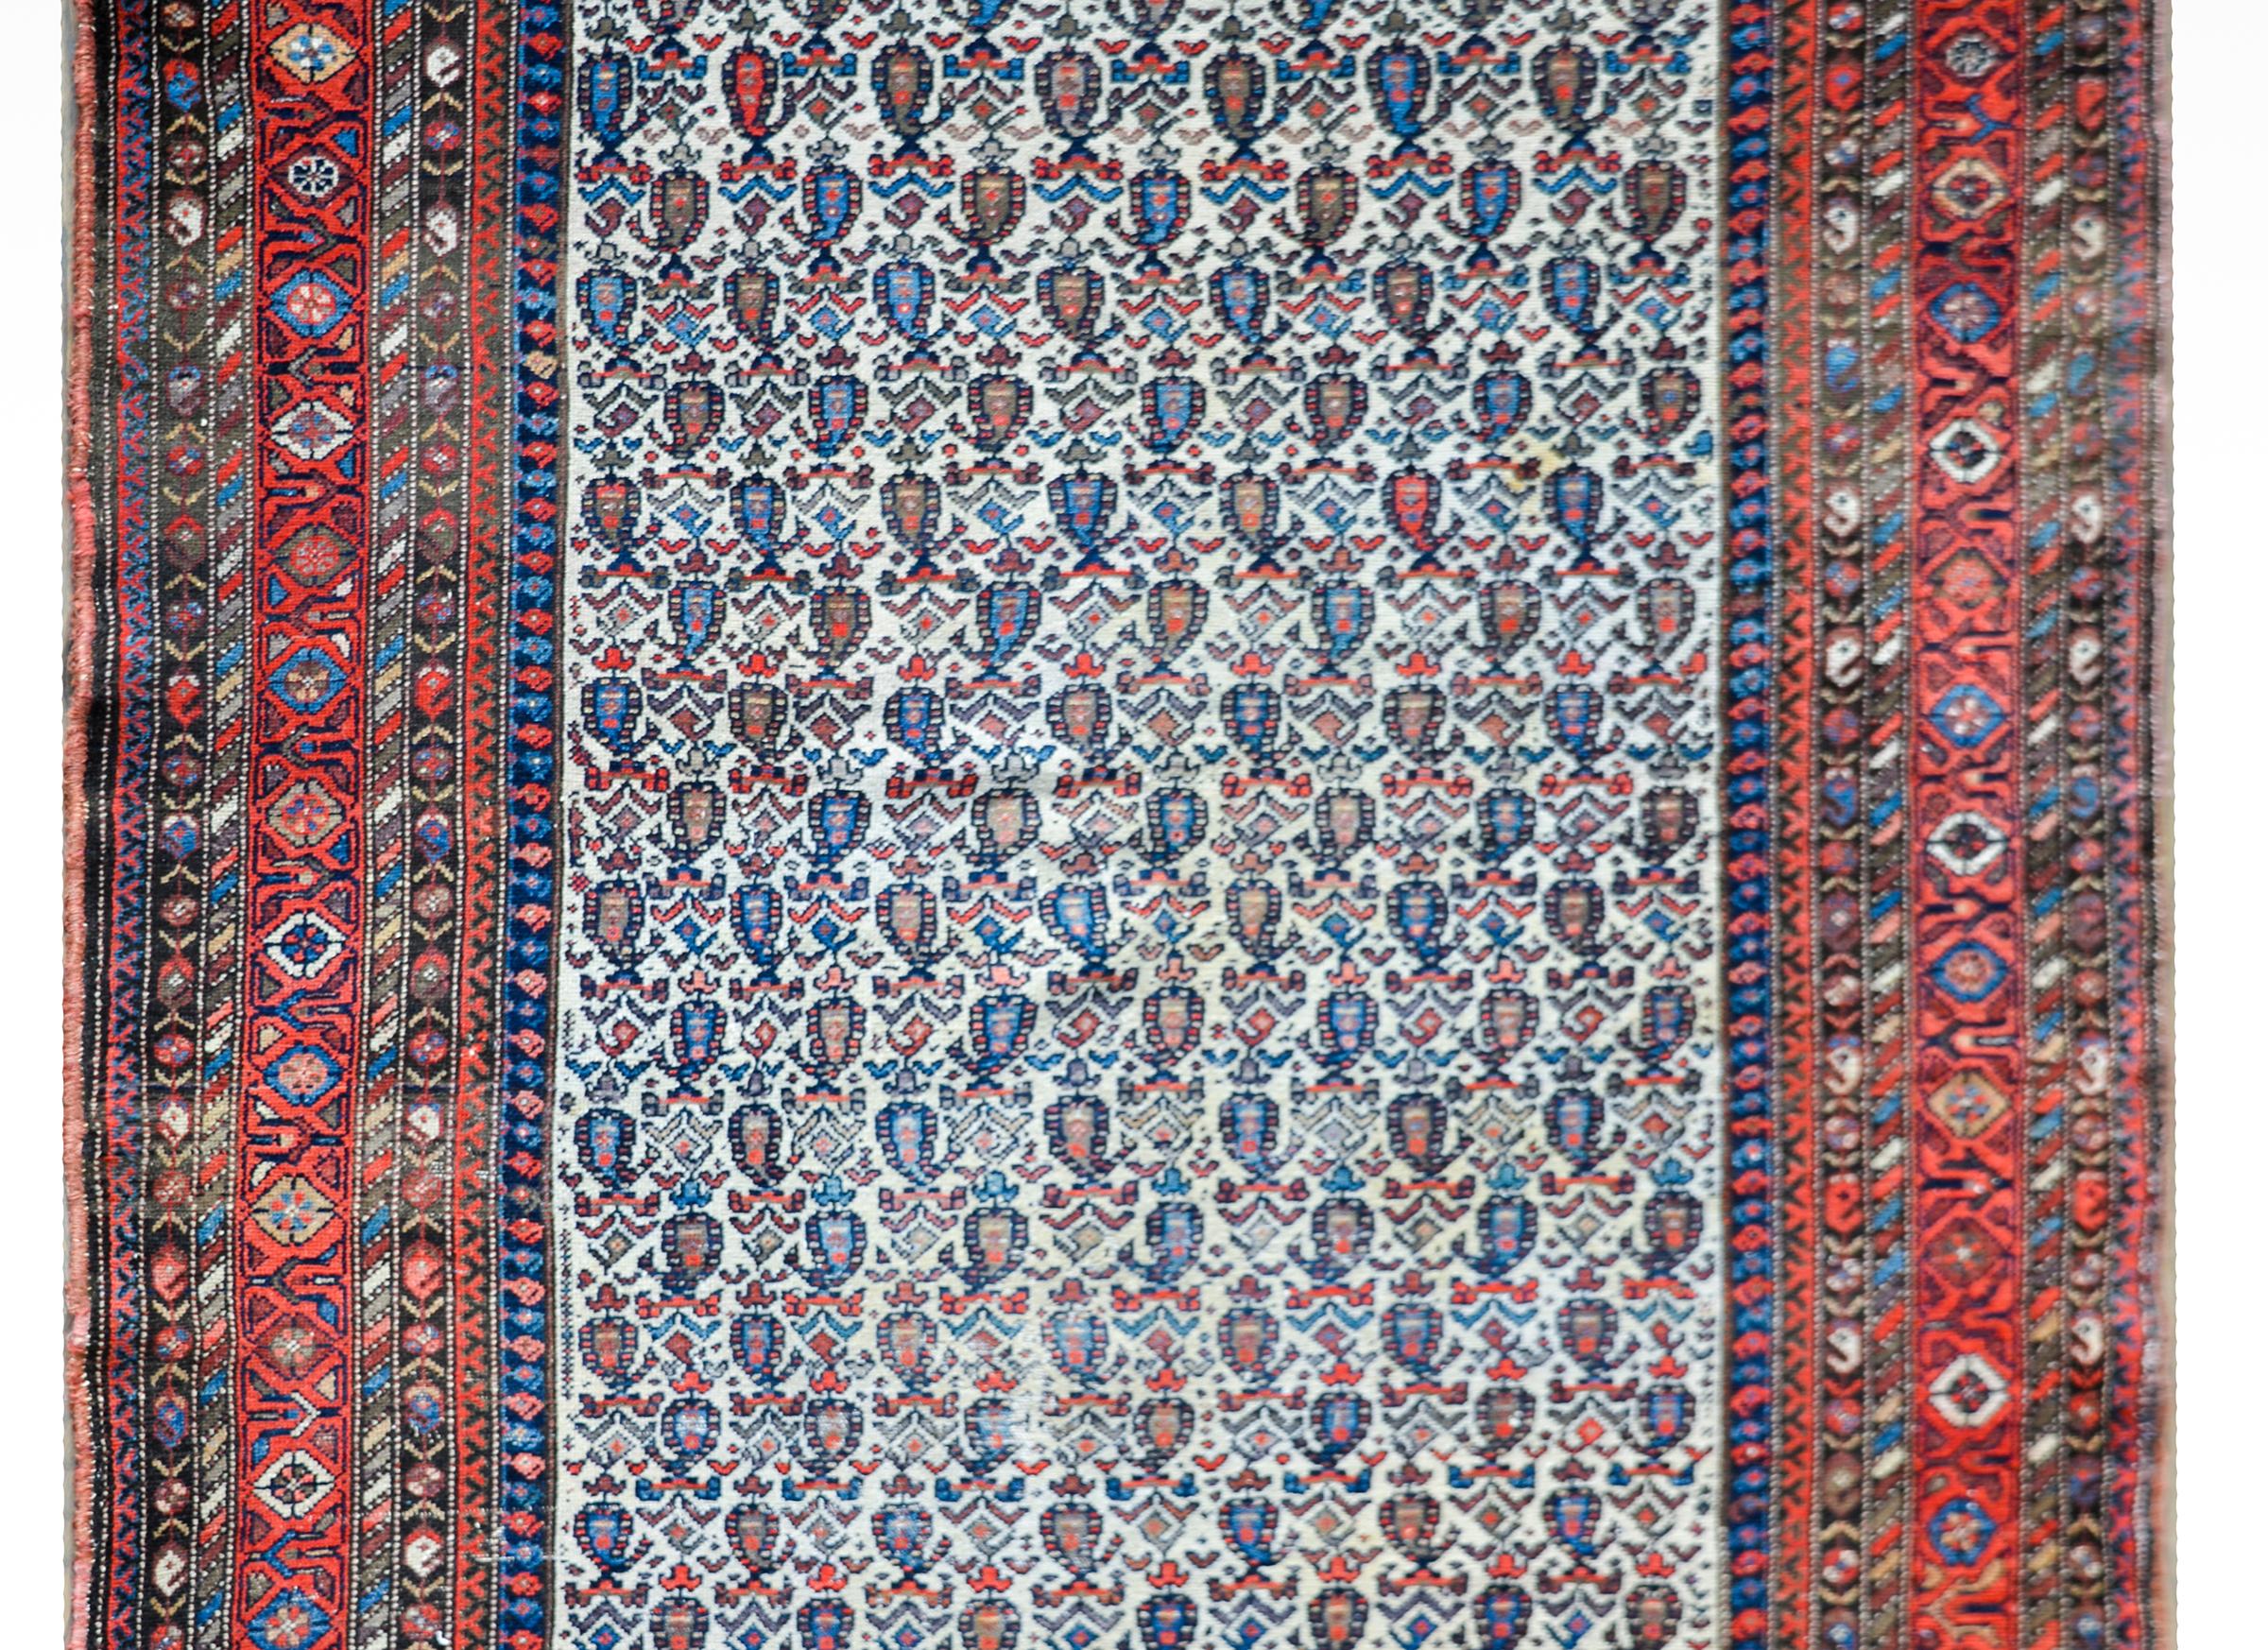 A wonderful early 20th century Persian Nehband rug with an all-over paisley and stylized floral pattern woven in myriad colors including crimson, indigo, gold and brown, against a cream colored background. The border is wide with multiple petite